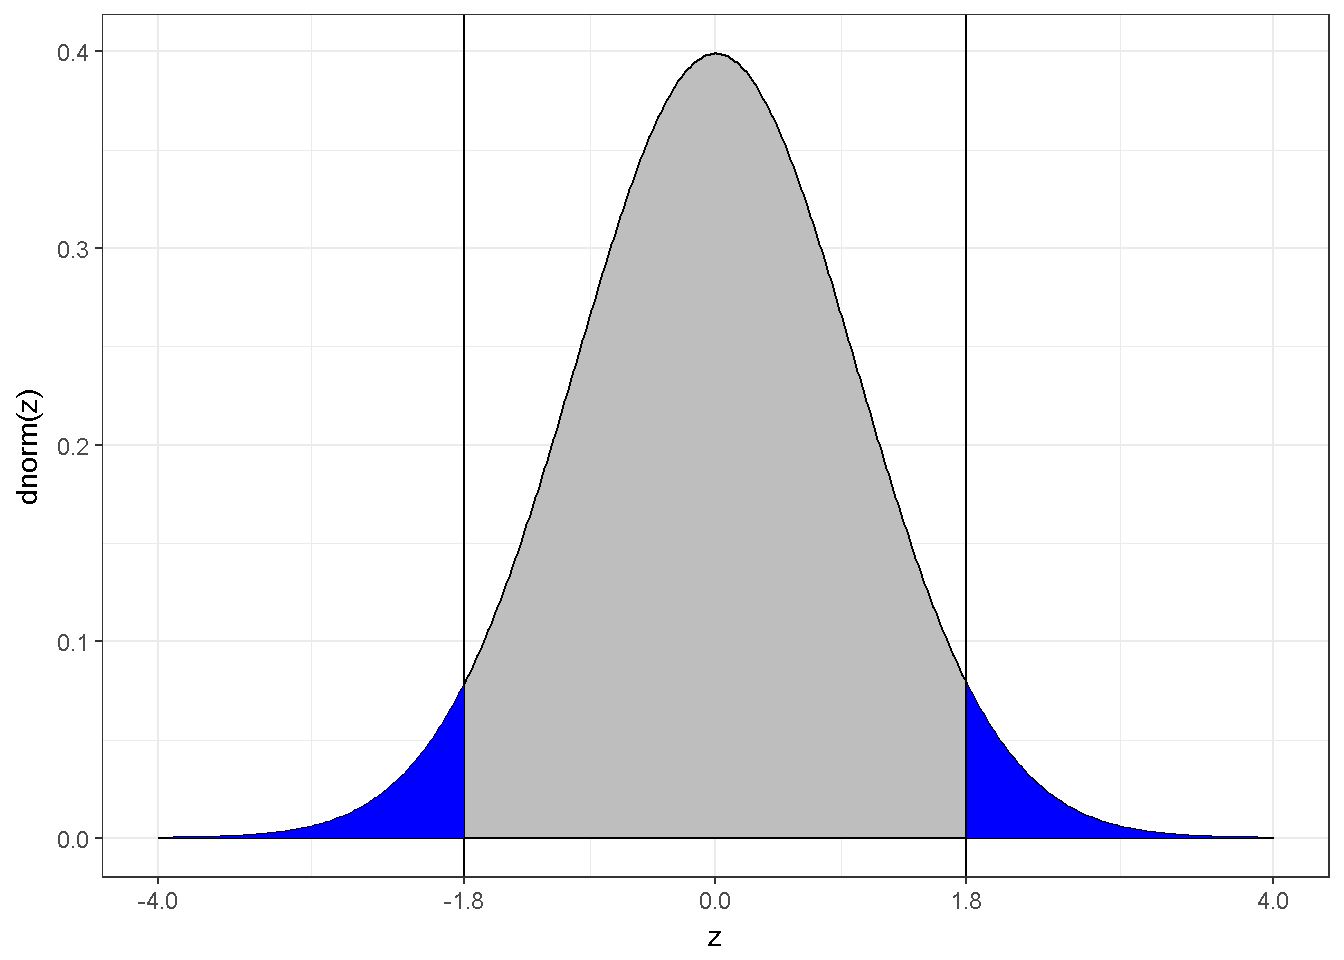 The z distribution and abs(z)=1.8